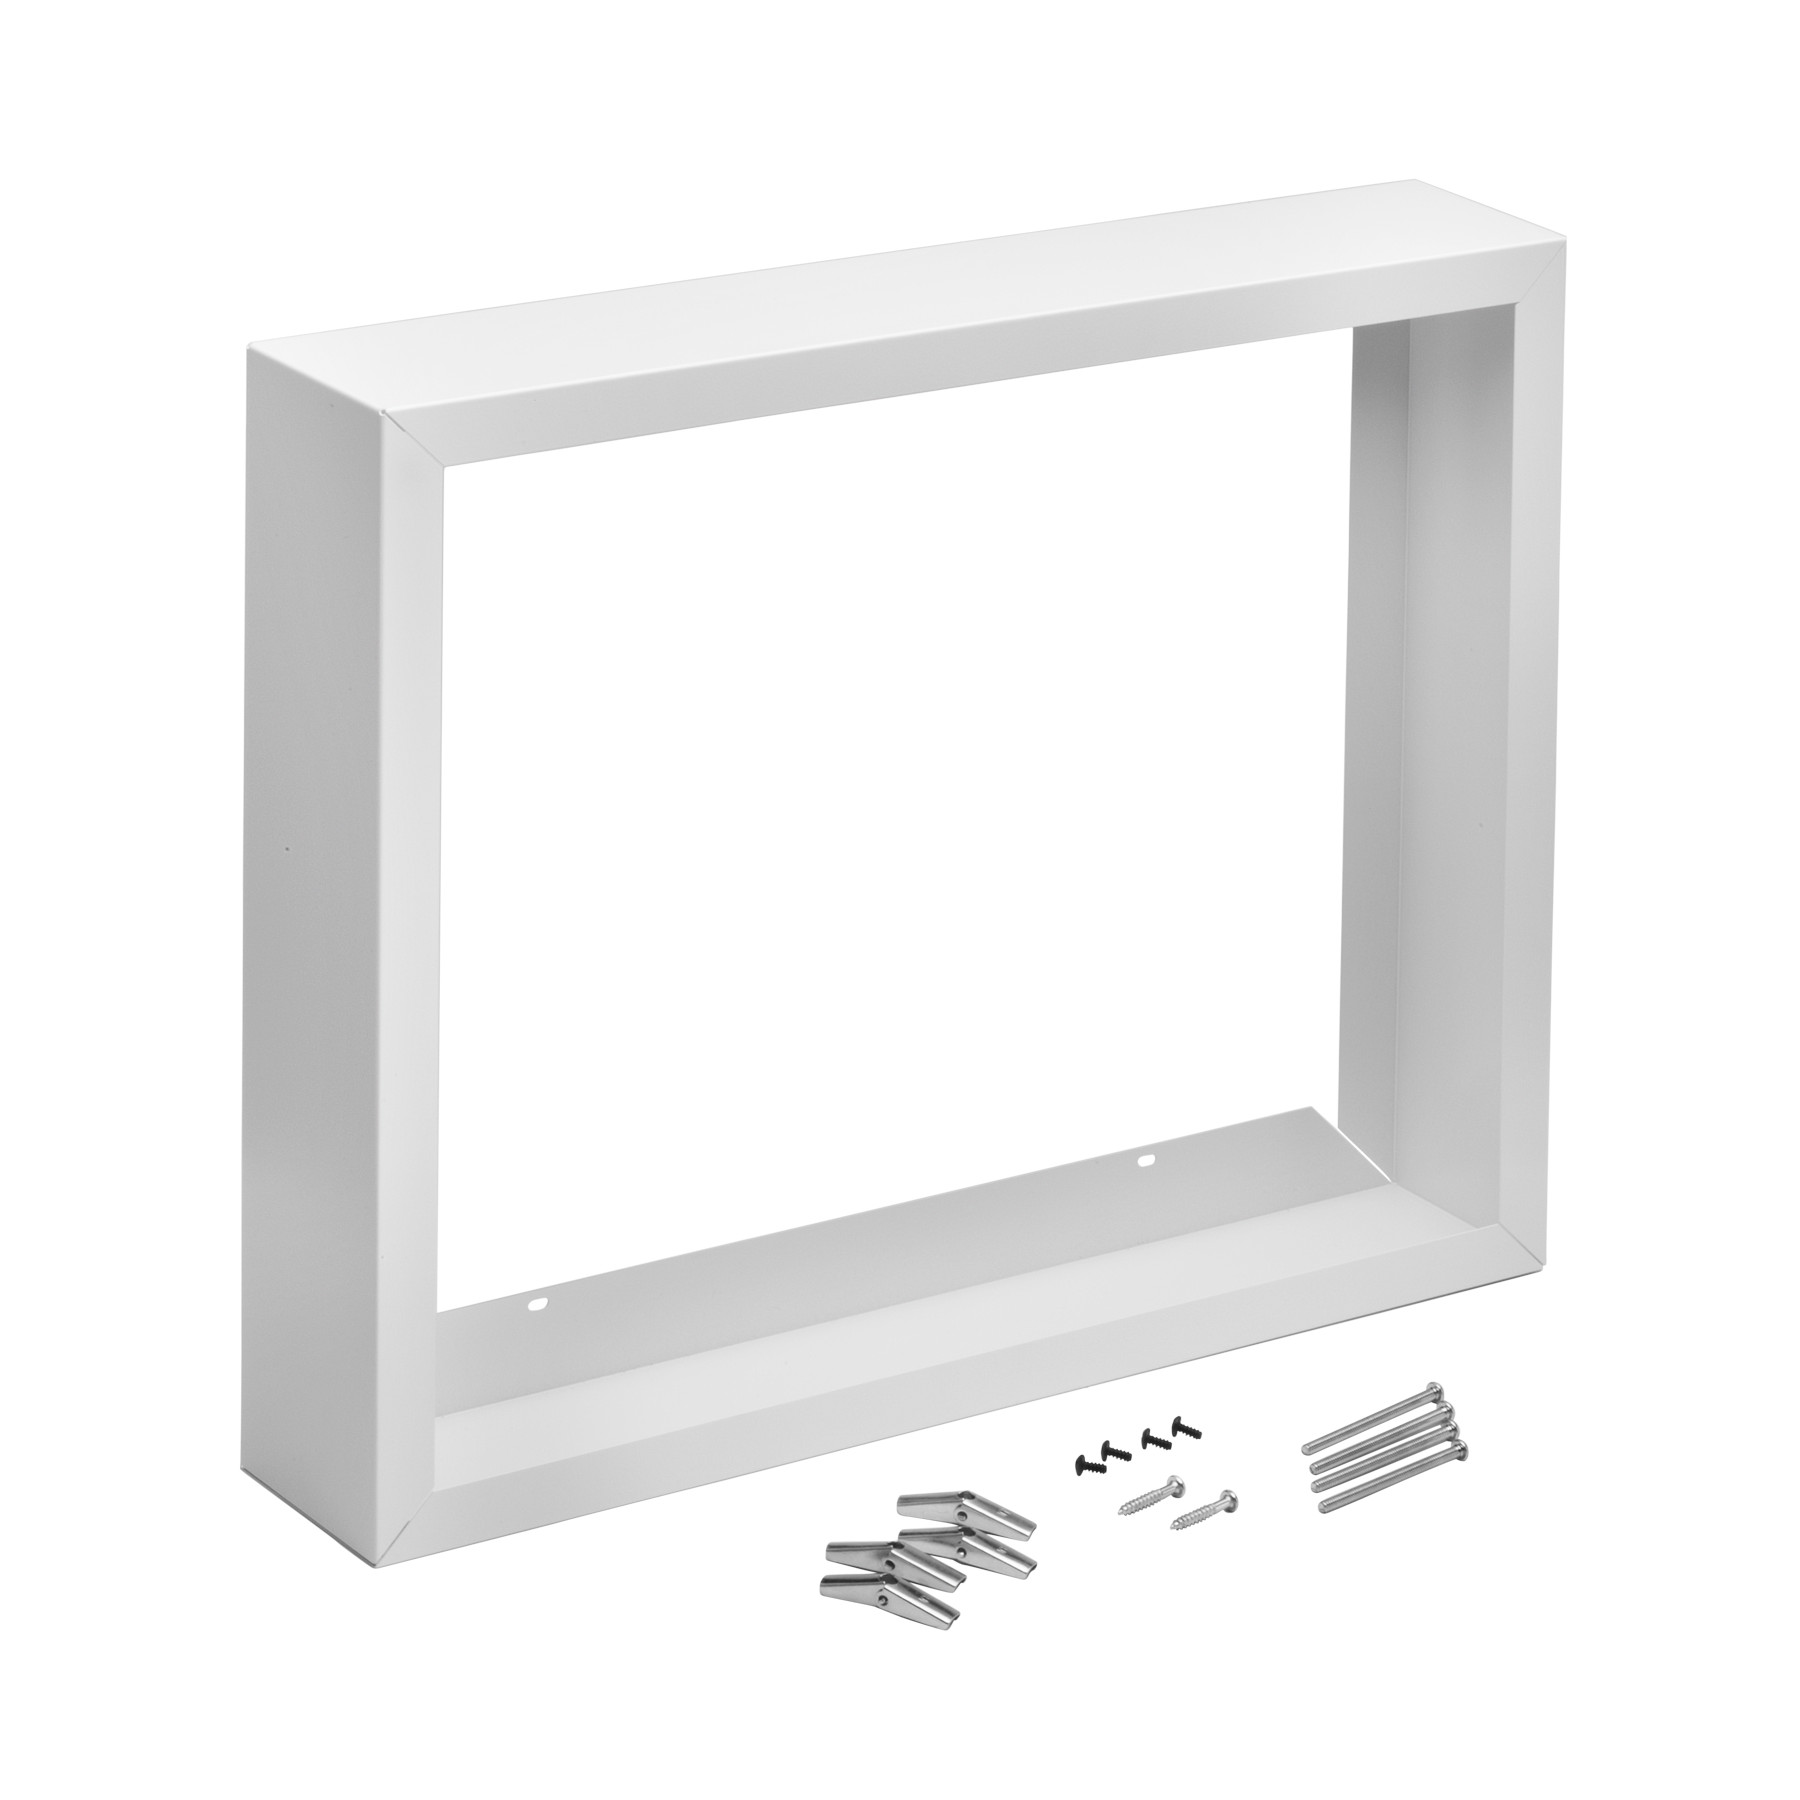 Broan® Surface Mount Kit for High Capacity Wall Heaters, White Enameled Steel